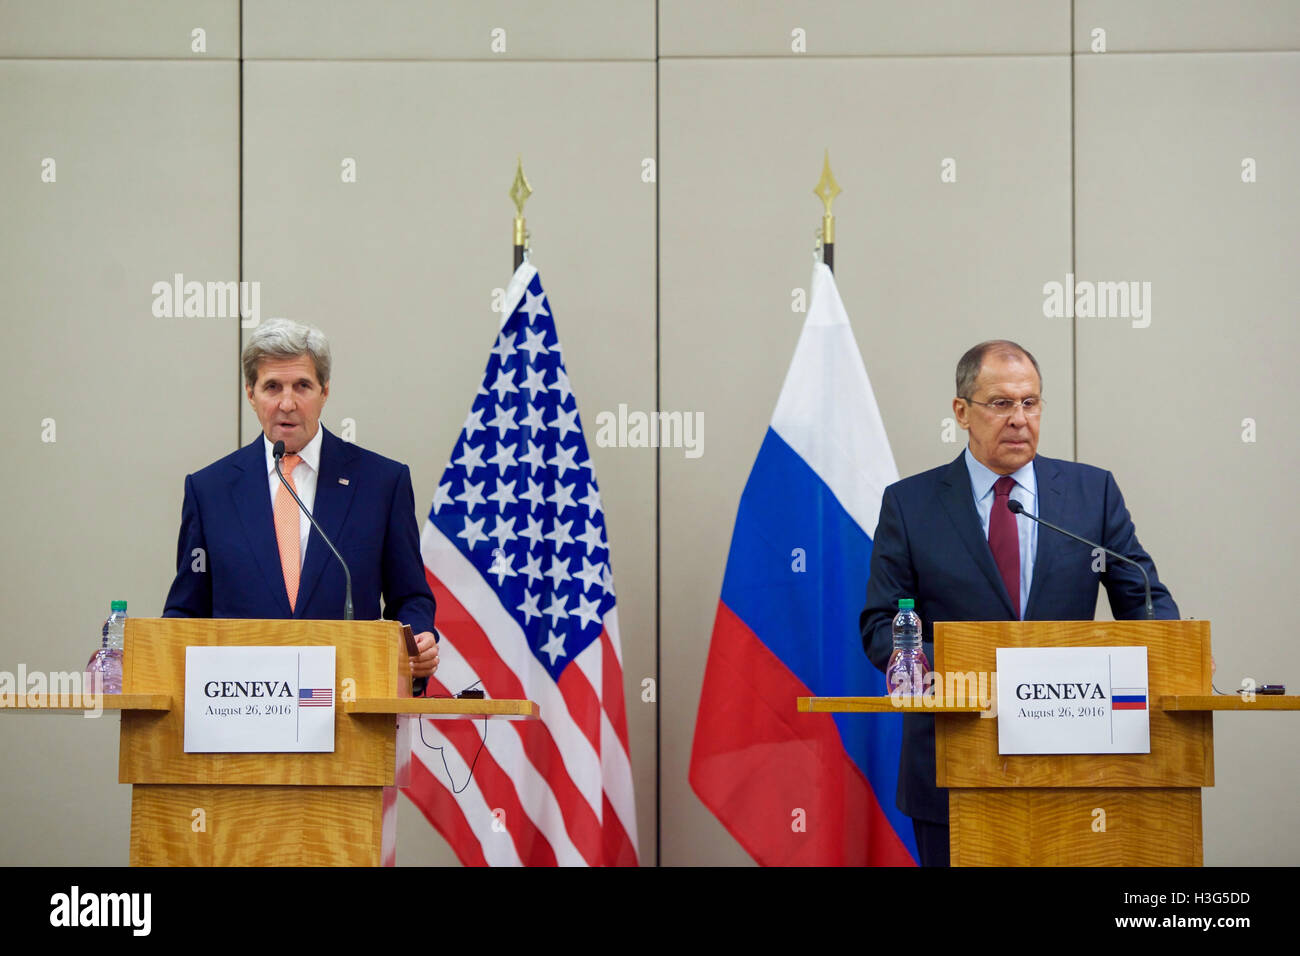 U.S. Secretary of State John Kerry speaks as he and Russian Foreign Minister Sergey Lavrov address reporters during a joint news conference following a bilateral meeting focused on Syria held August 26, 2016, at the President Wilson Hotel in Geneva, Switzerland. Stock Photo